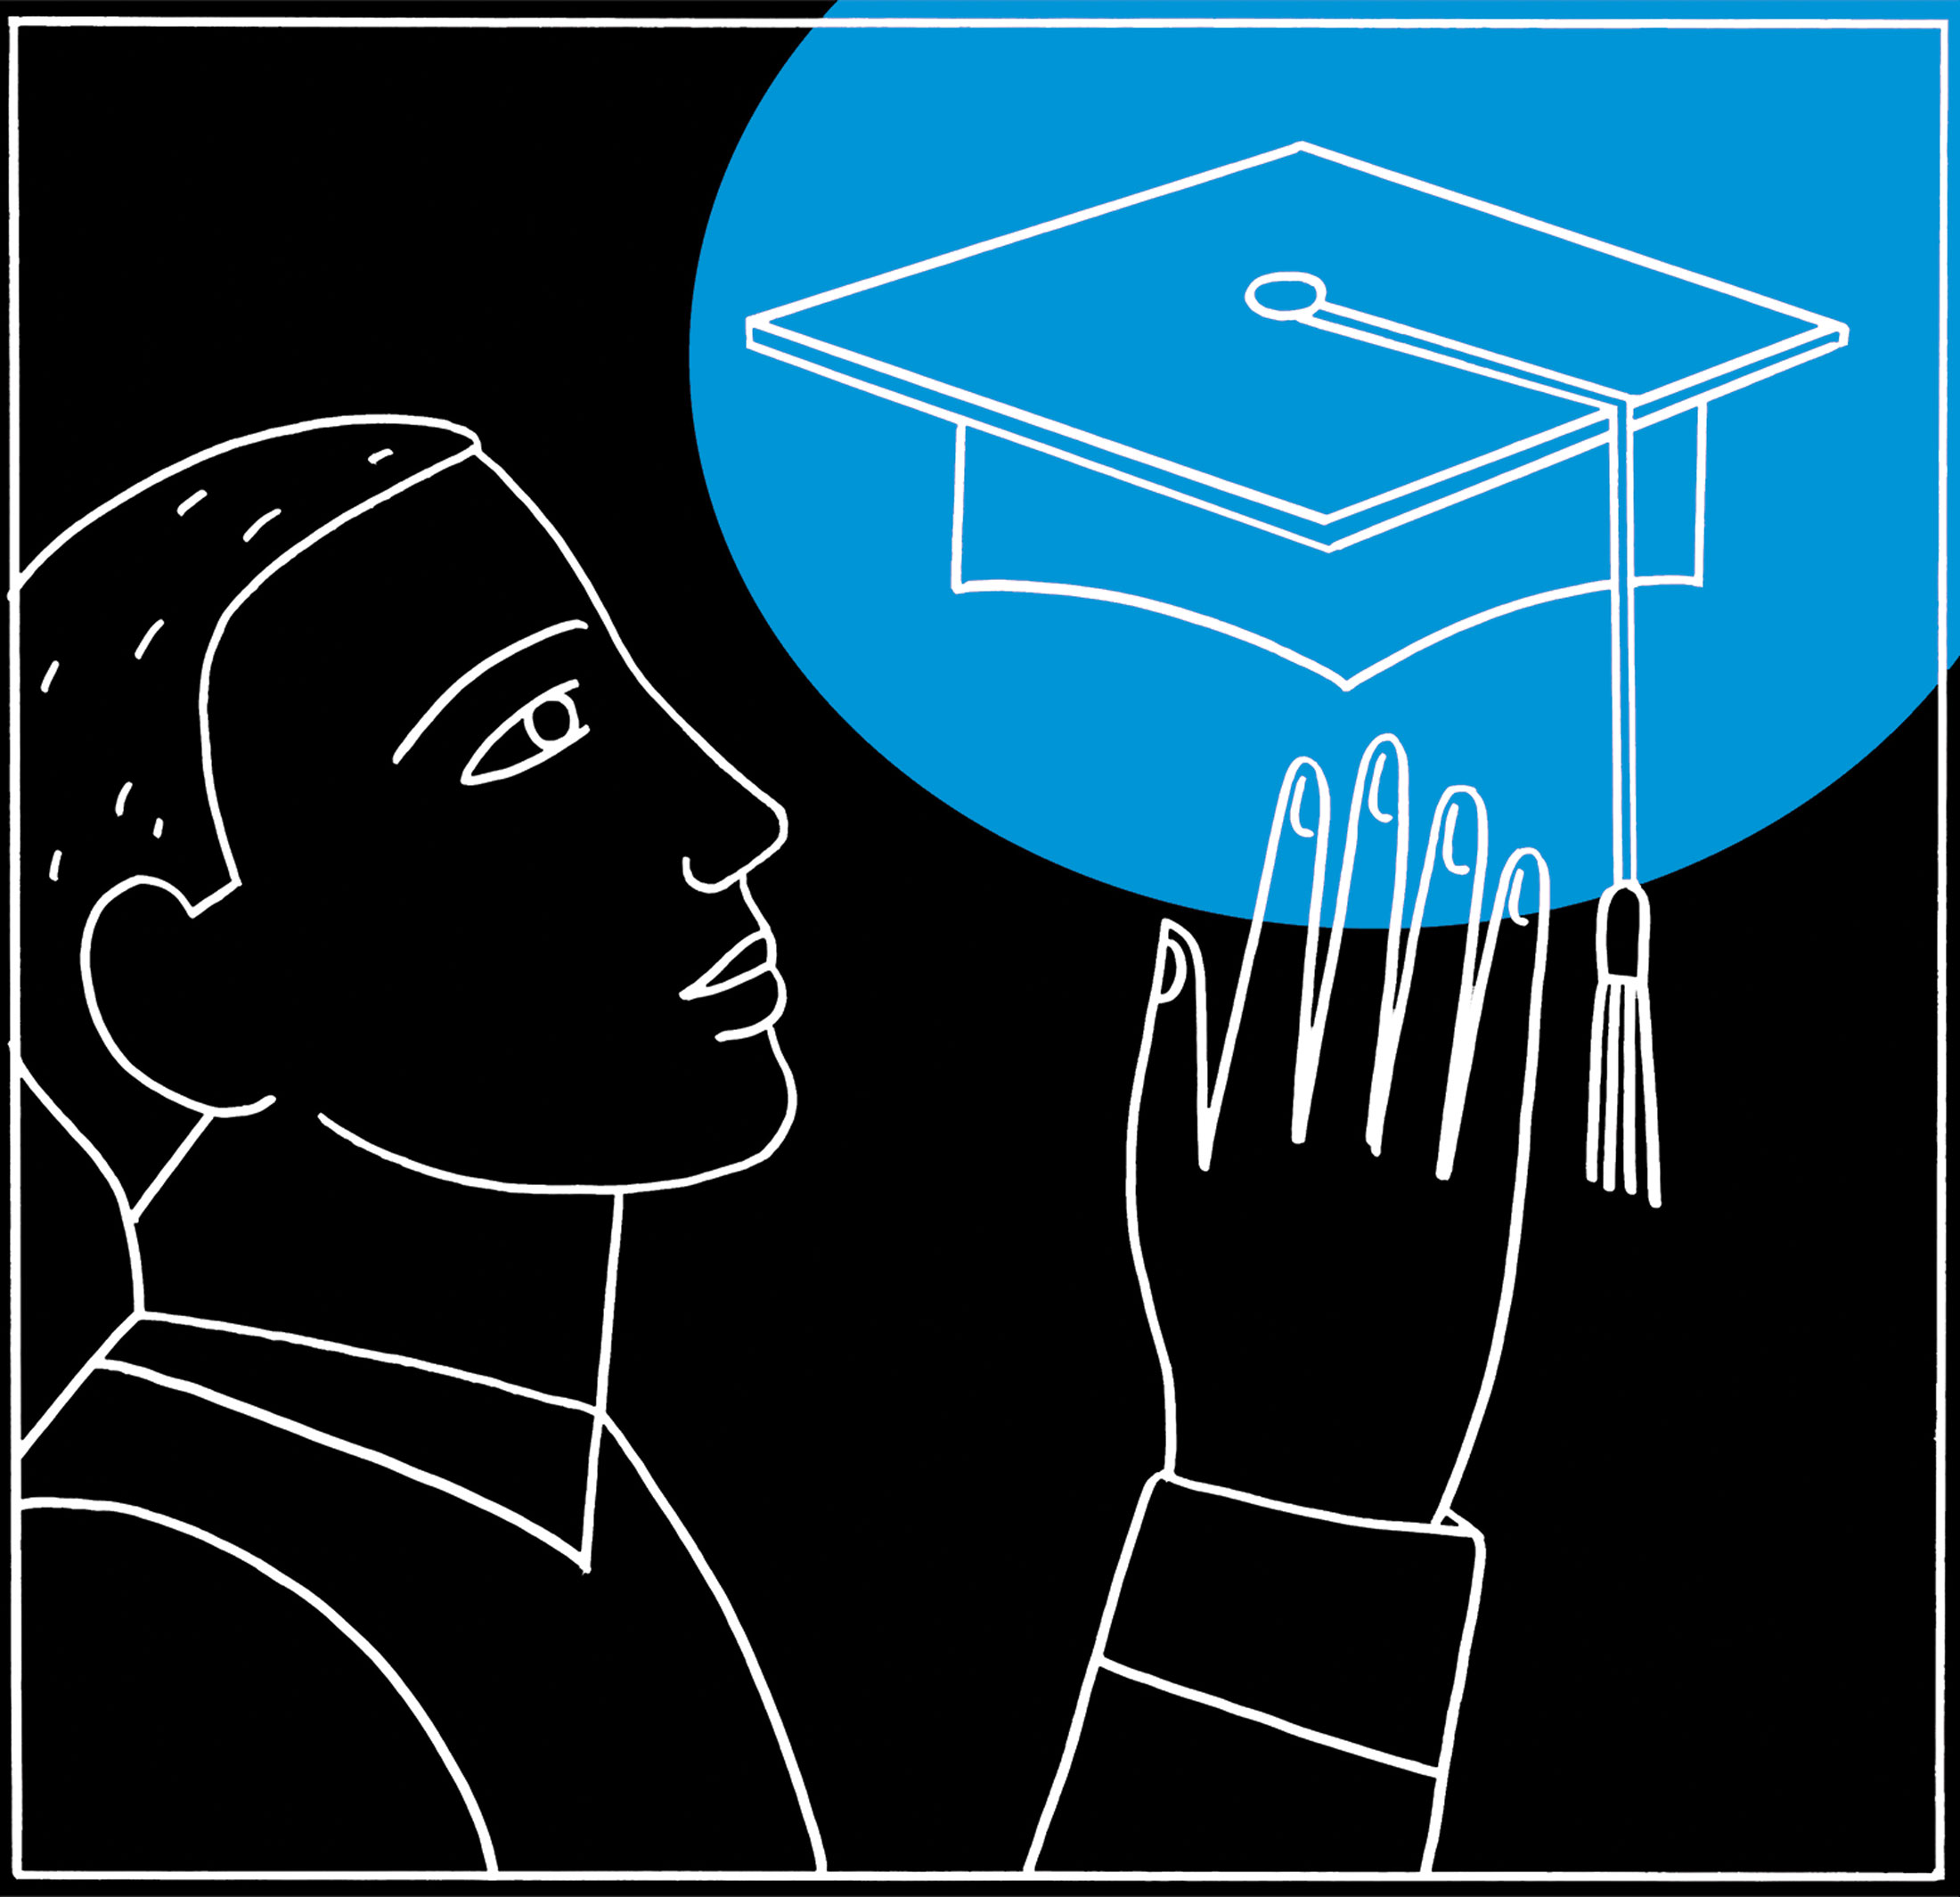 A line drawing shows a student reaching for a mortarboard.